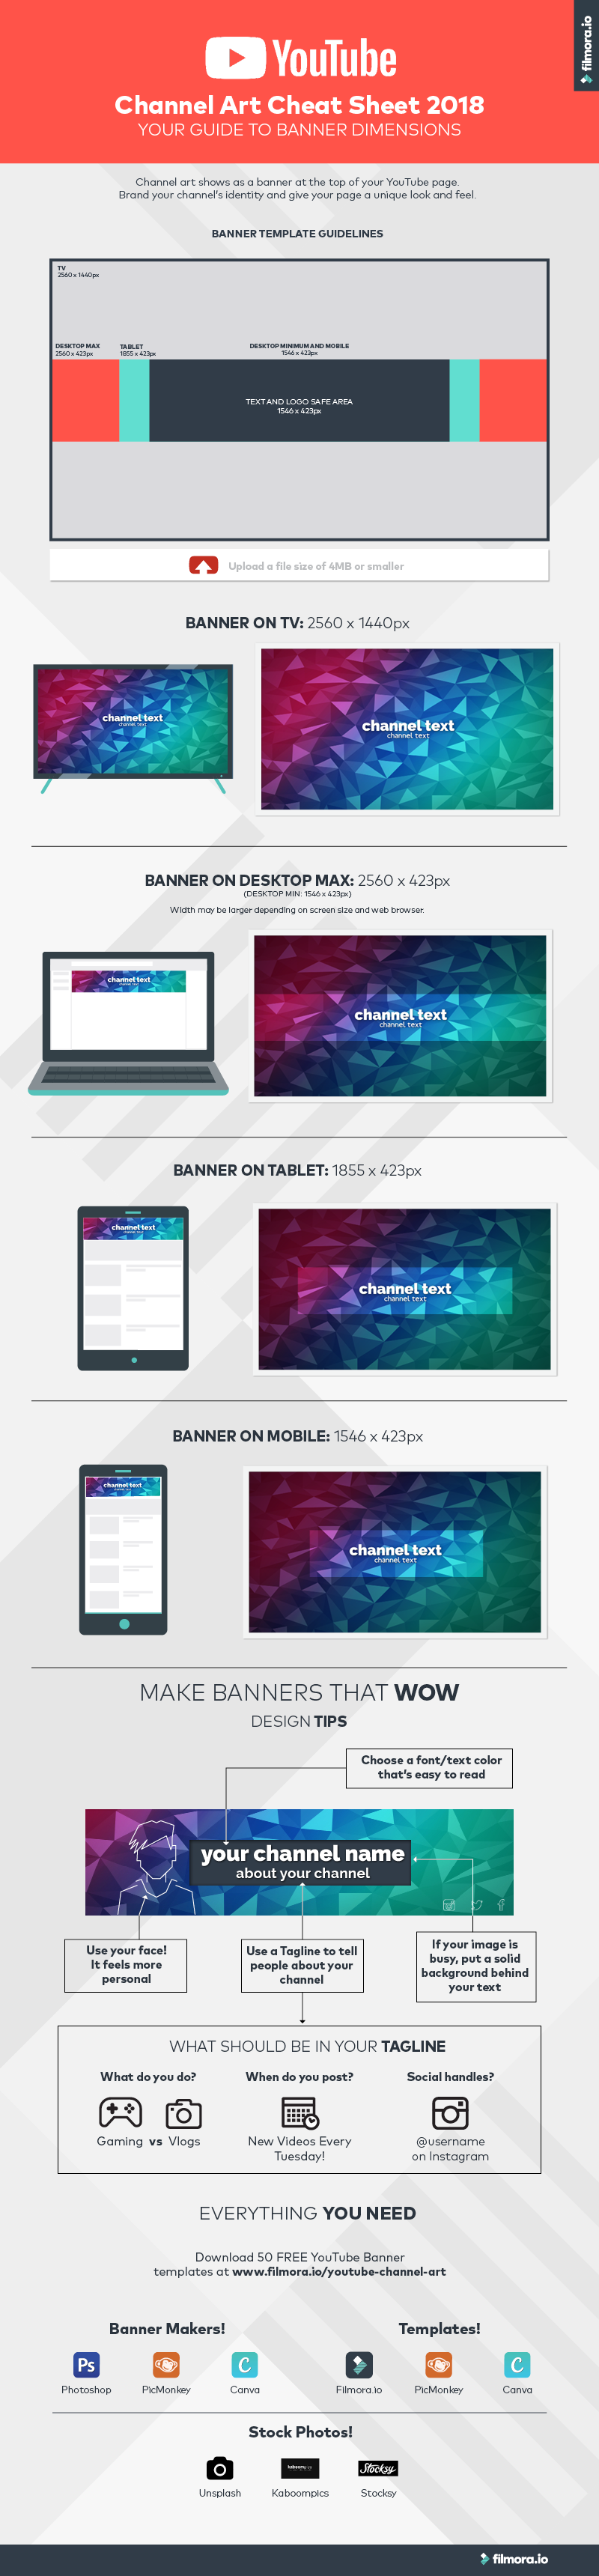 infographic - YouTube Channel Art Dimensions - Banner Sizes and Design Tips!